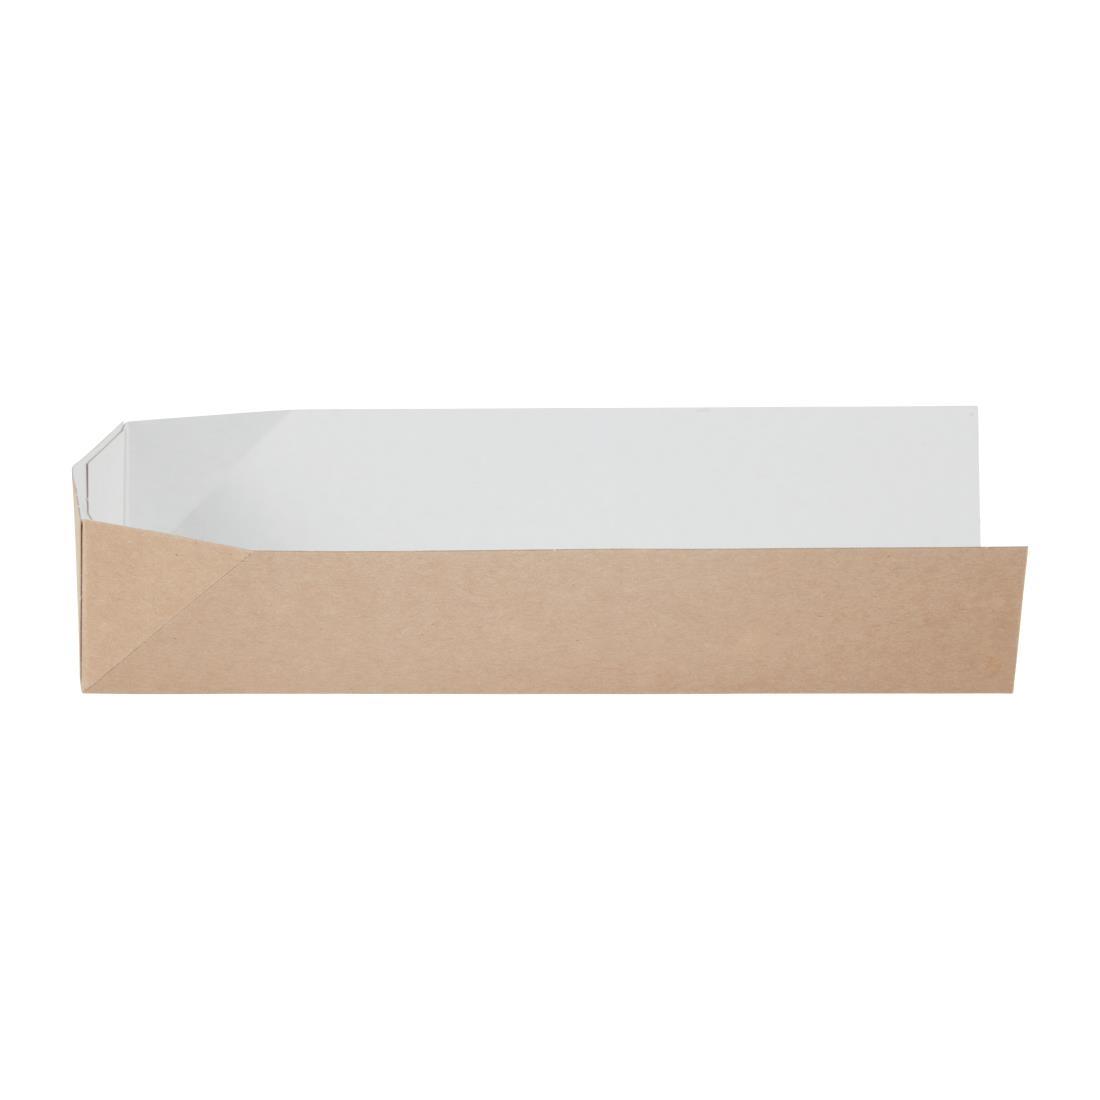 Colpac Compostable Open-Ended Food Trays 250mm (Pack of 500) - CK937  - 2